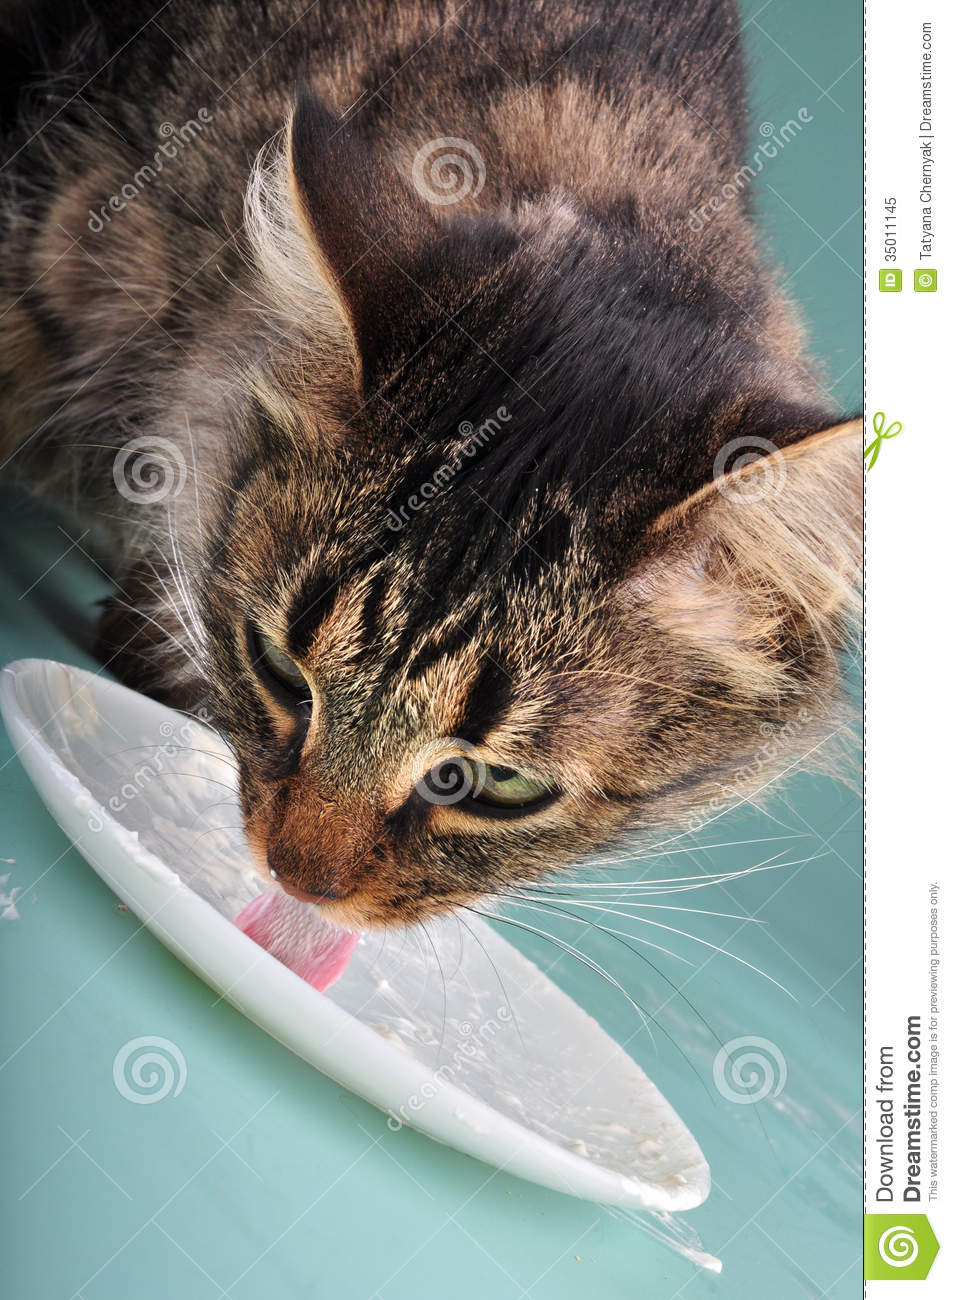 Cat Eating Sour Milk Royalty Free Stock Photo   Image  35011145